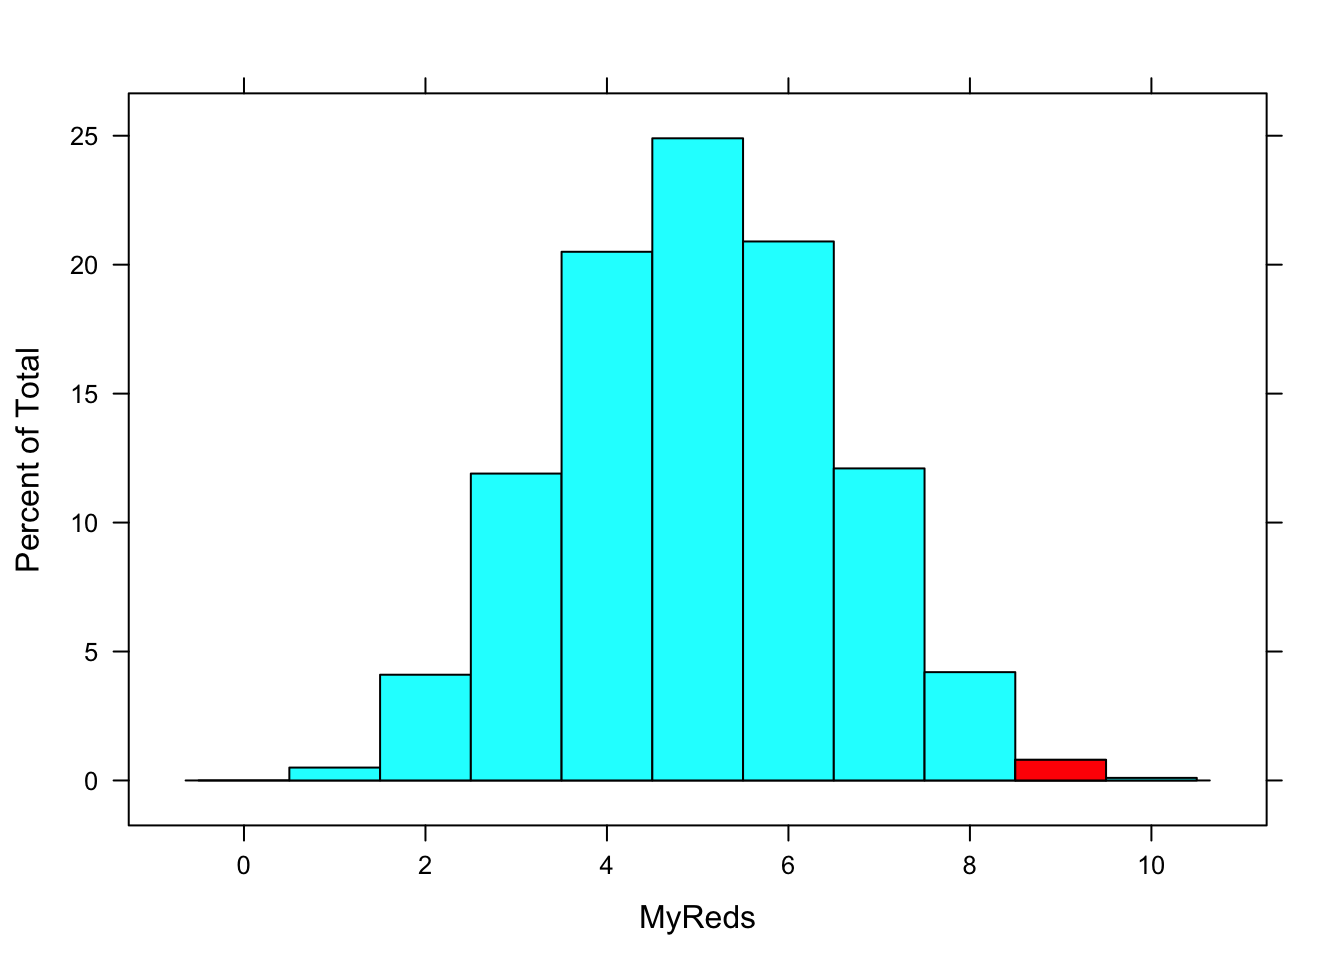 Class Probability:  The shaded rectangle in the histogram represents the probability that the volunteer would draw 9 cards if they were drawing from a standard deck of playing cards.